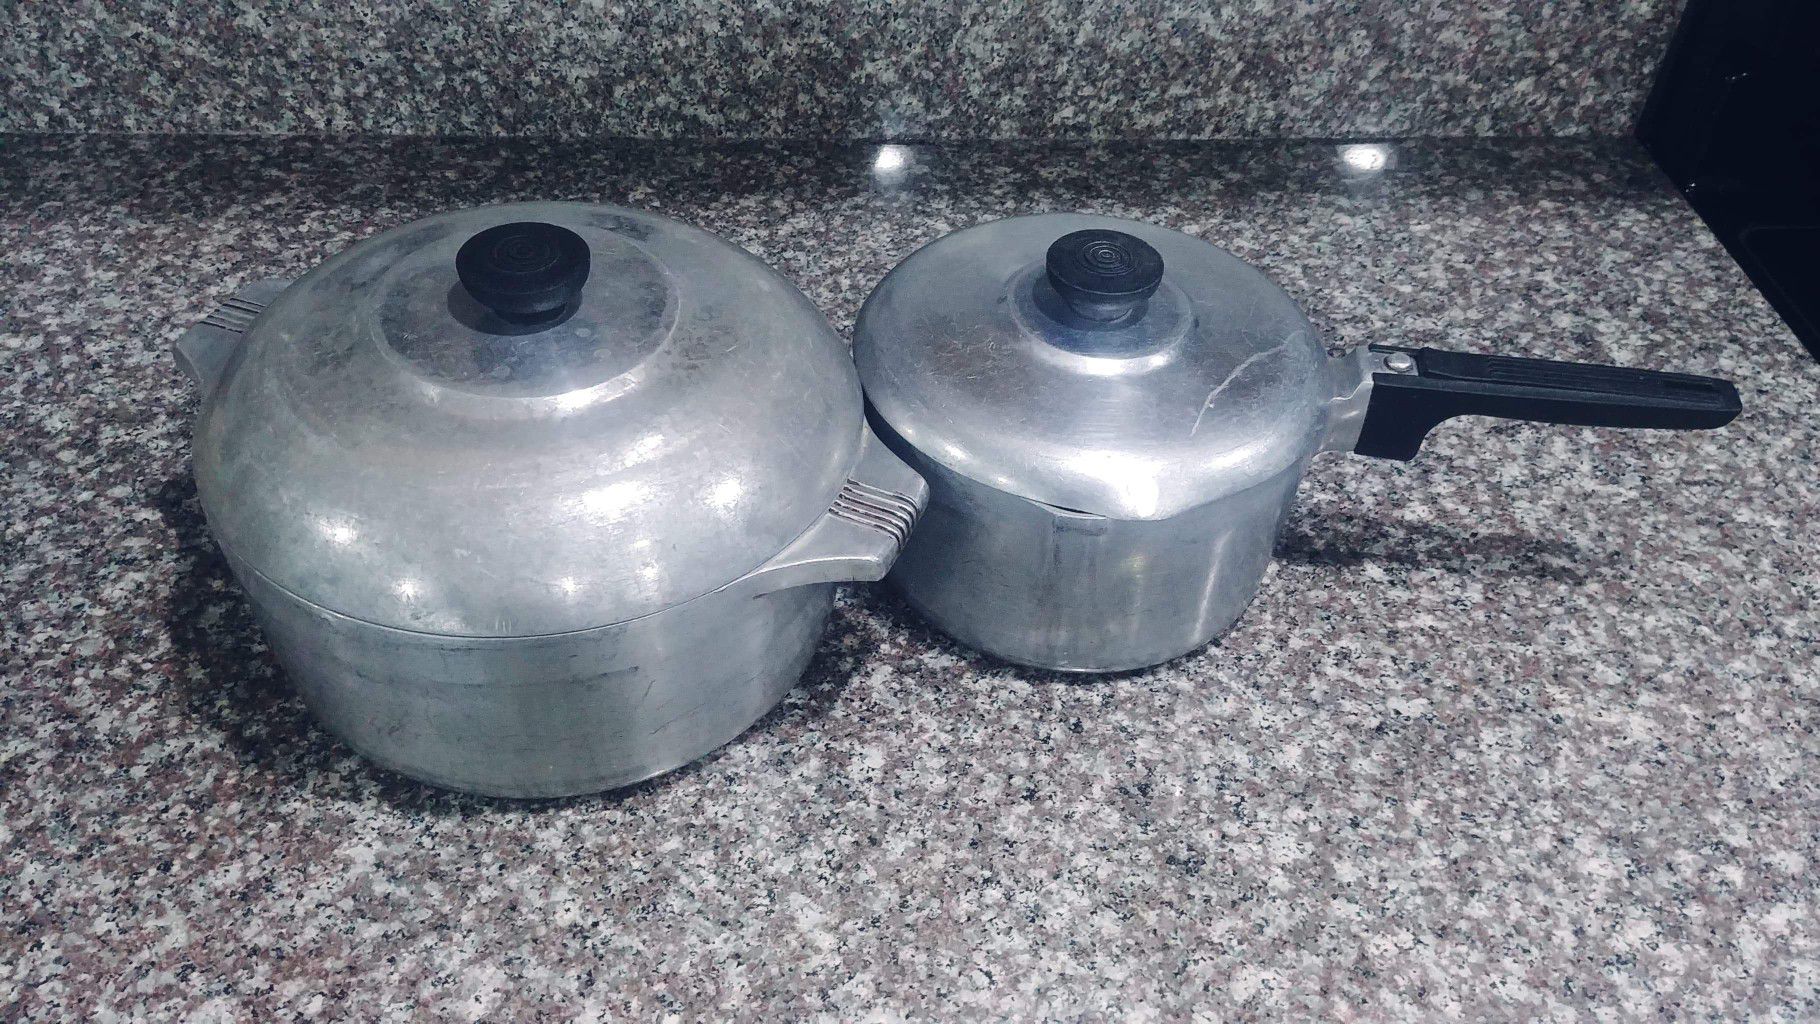 Magnalite Cookware for Sale in Beaumont, TX - OfferUp